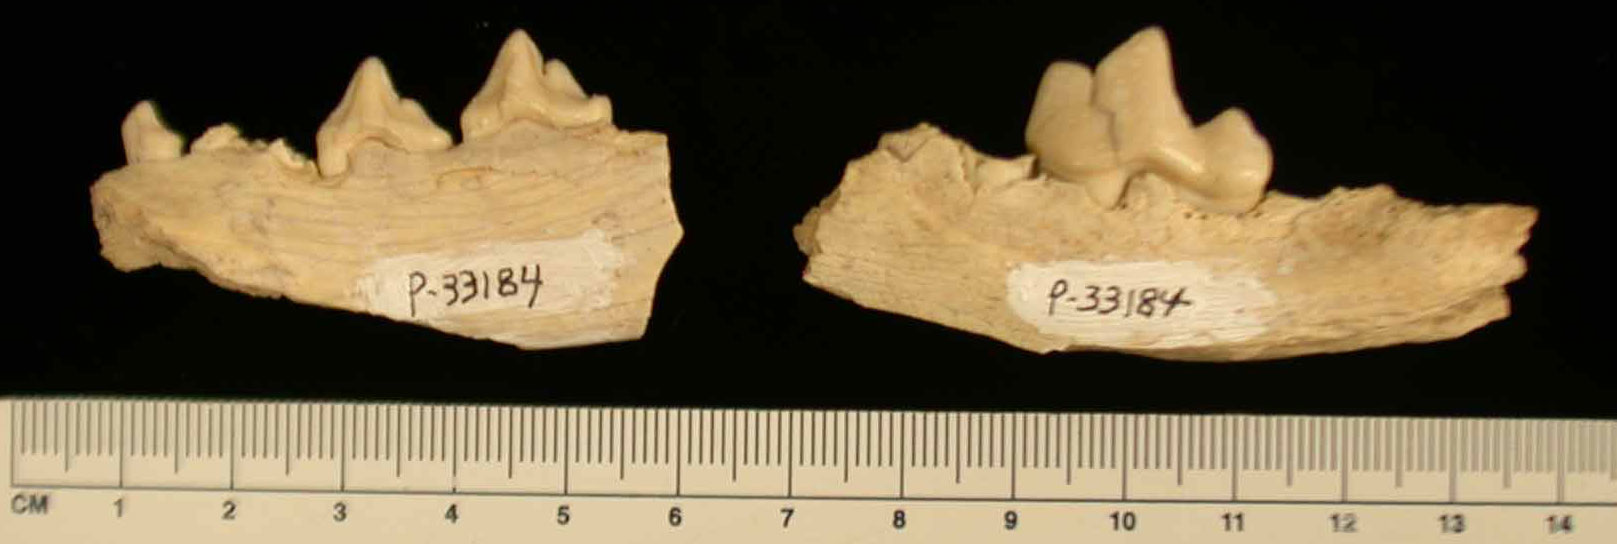 Photo of fragments of a jawbone of an extinct canid from the Pliocene of Arizona. Photo shows two pieces of jawbone with pointed teeth. The fragments are about 5 and 7 centimeters long.